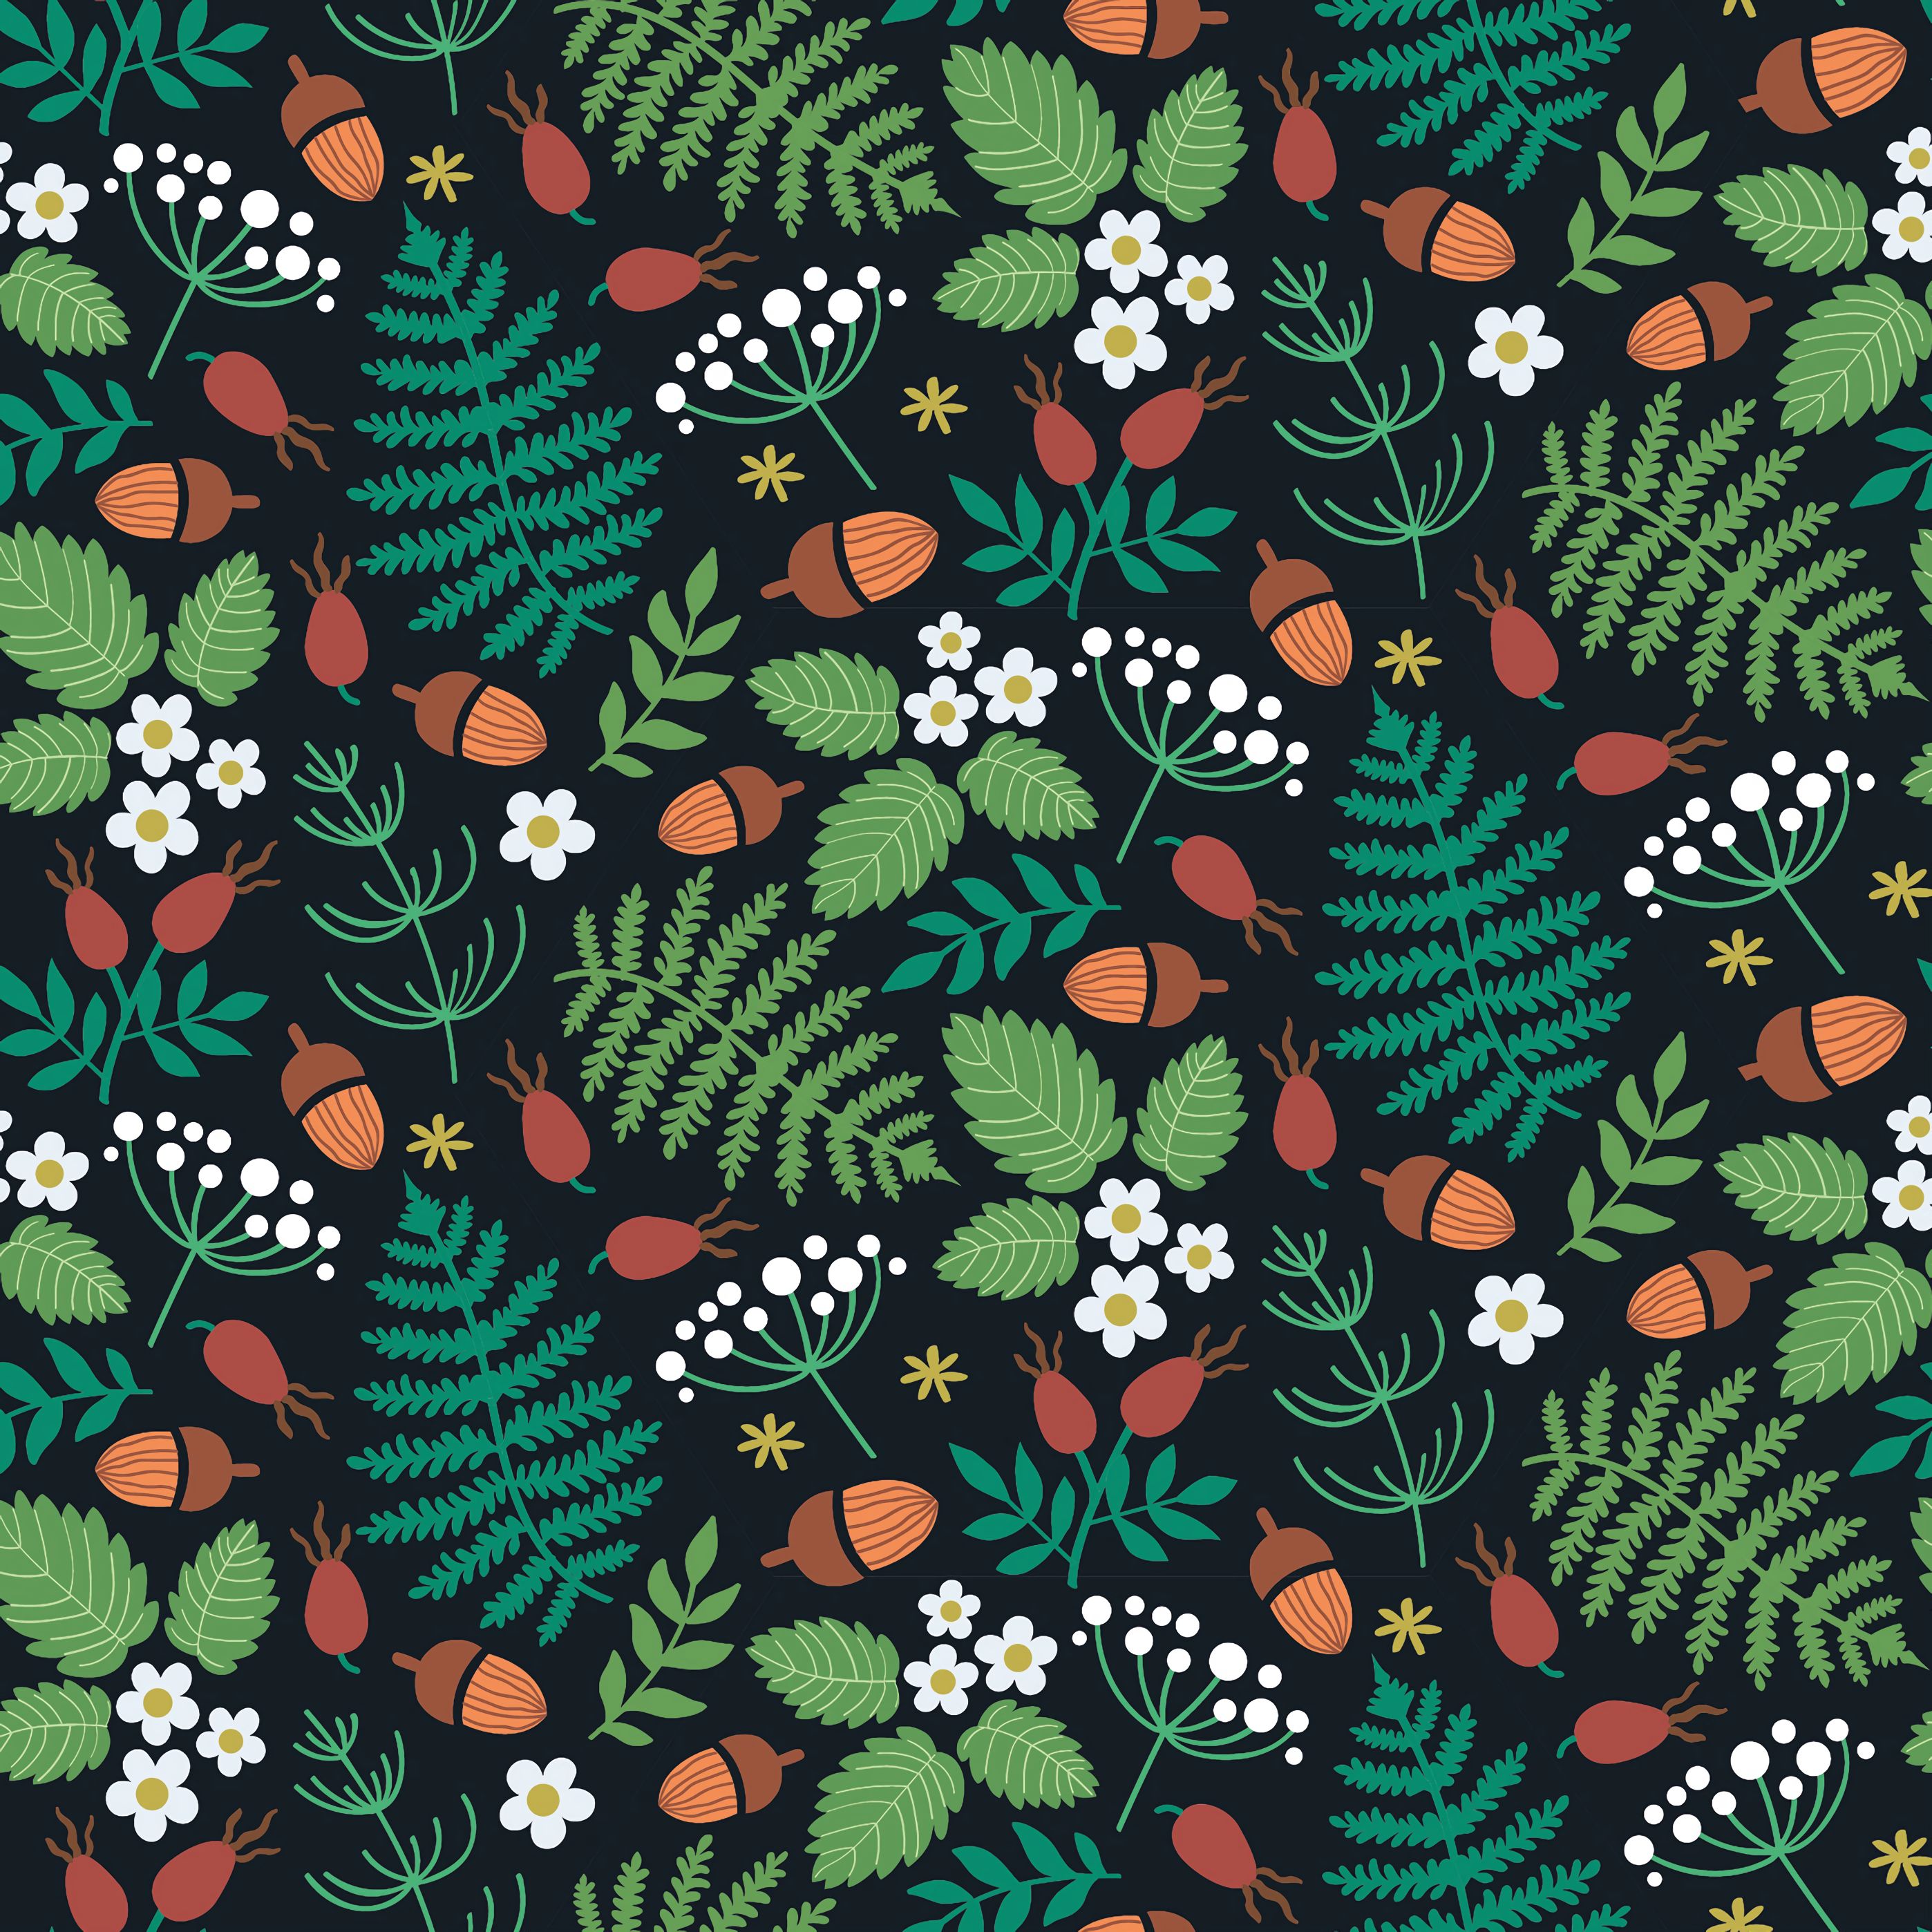 forest, texture, textures, leaves, acorns, berries, wild strawberries, strawberry, motive, pattern phone background